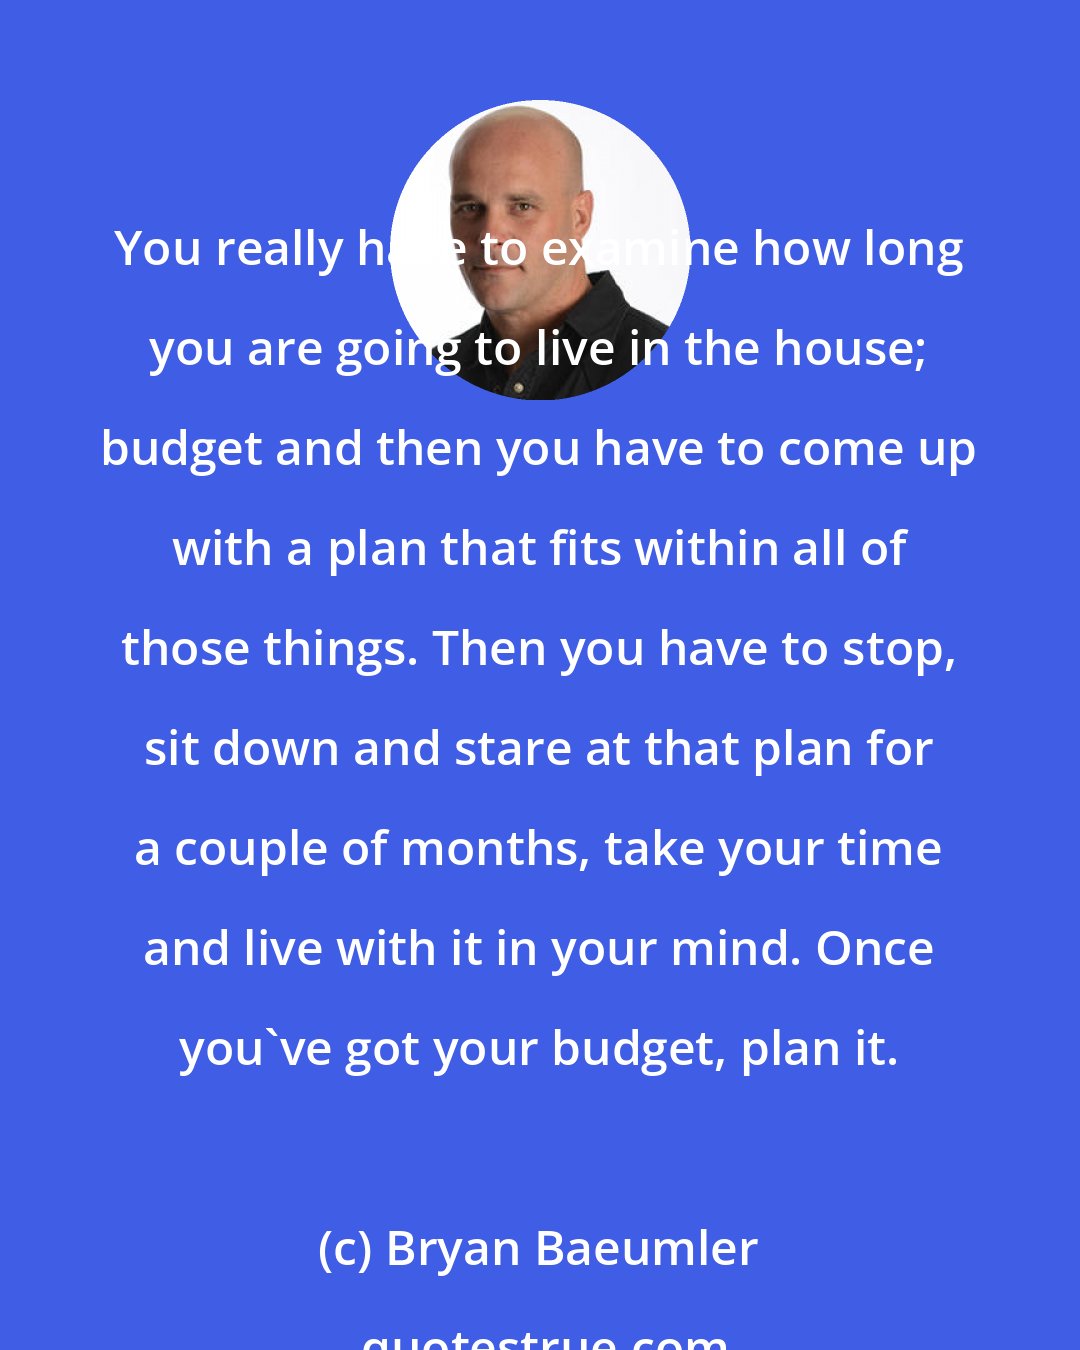 Bryan Baeumler: You really have to examine how long you are going to live in the house; budget and then you have to come up with a plan that fits within all of those things. Then you have to stop, sit down and stare at that plan for a couple of months, take your time and live with it in your mind. Once you've got your budget, plan it.